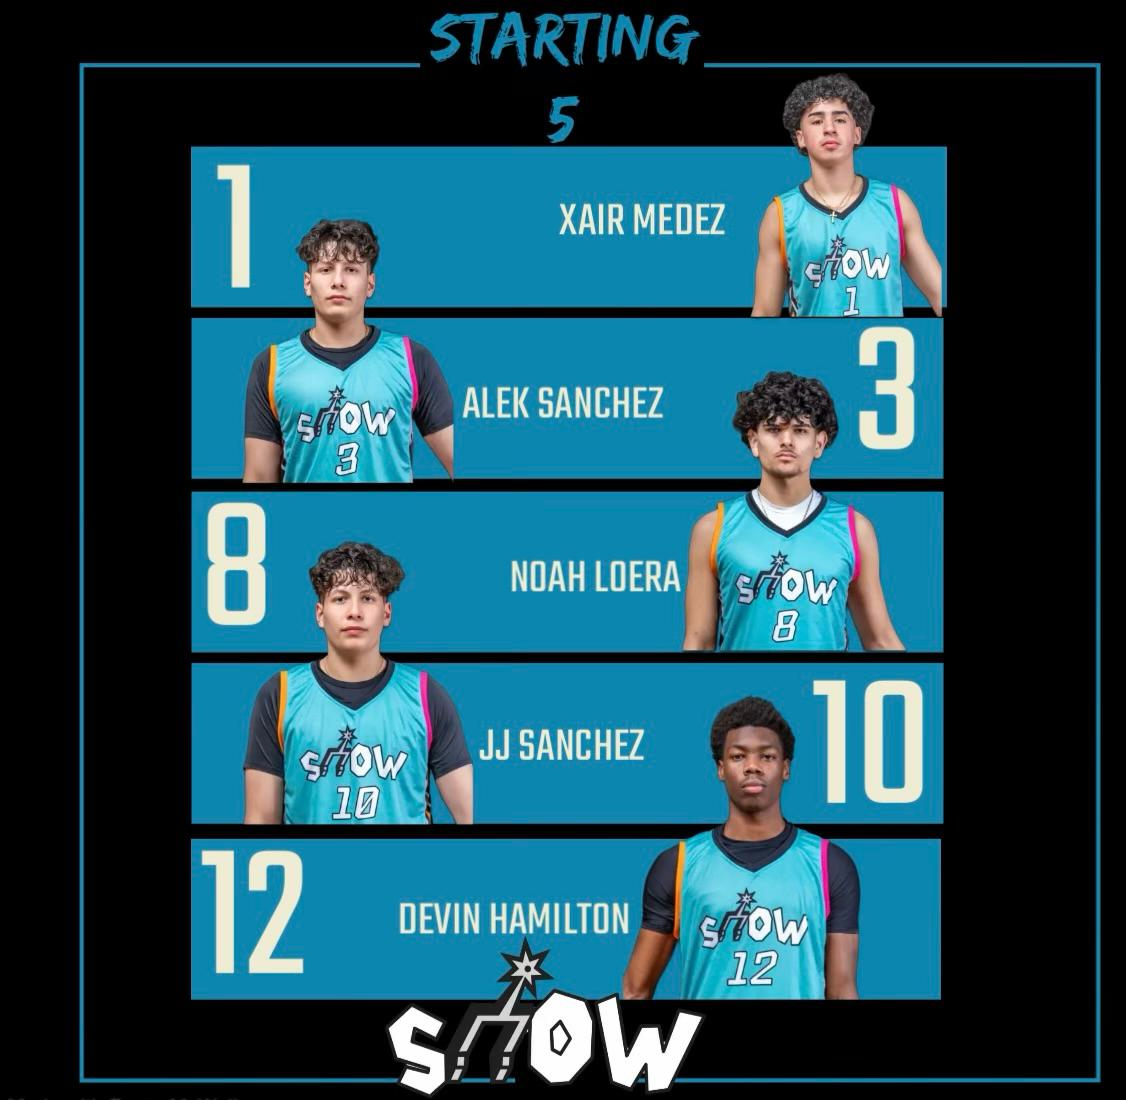 Our starting 5 for the first game of the day at 1:30pm PDT. Make sure to tune in to the live.